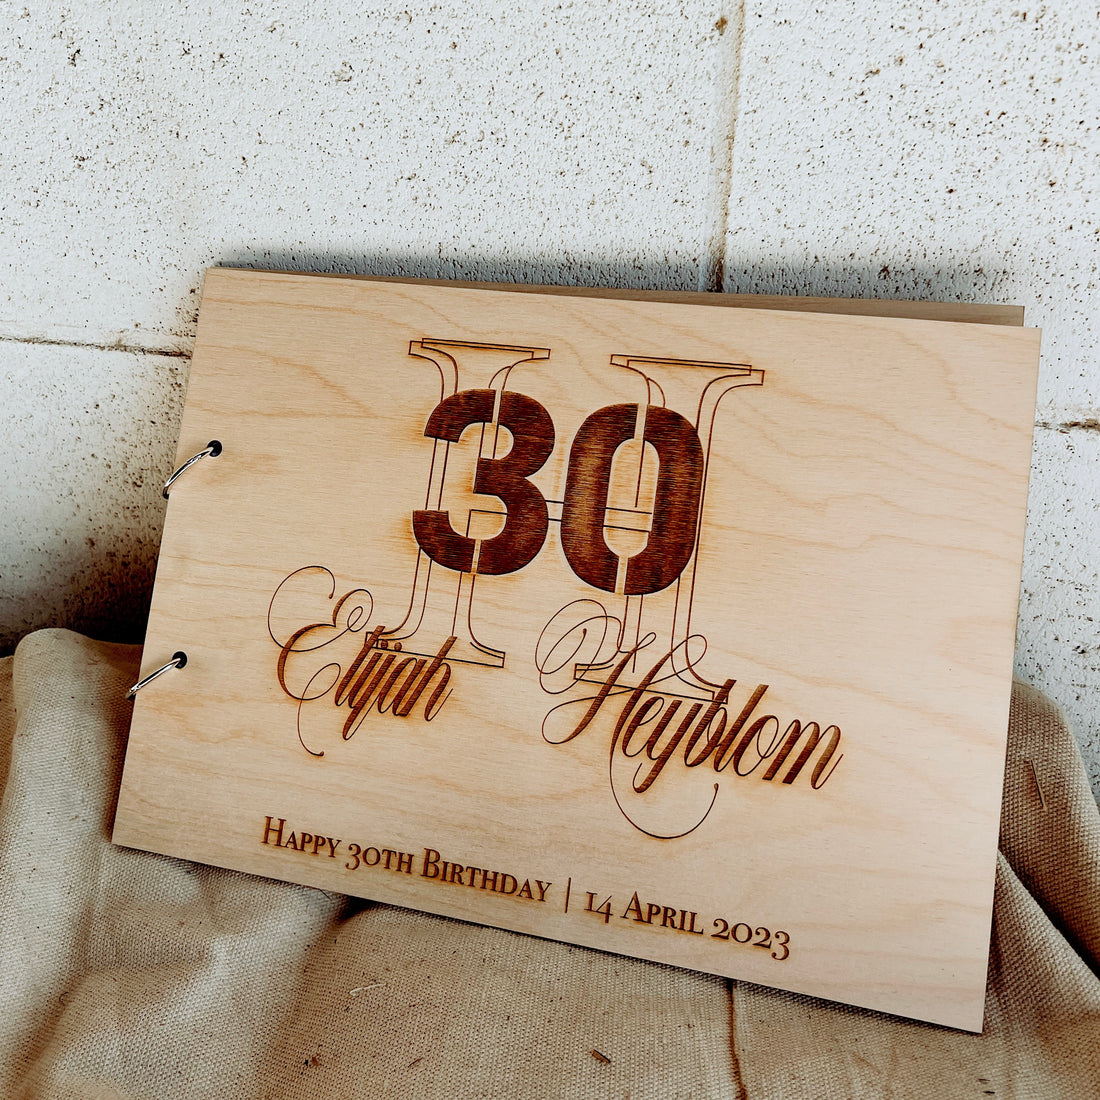 Personalised Engraving Wooden Wedding Guest Book